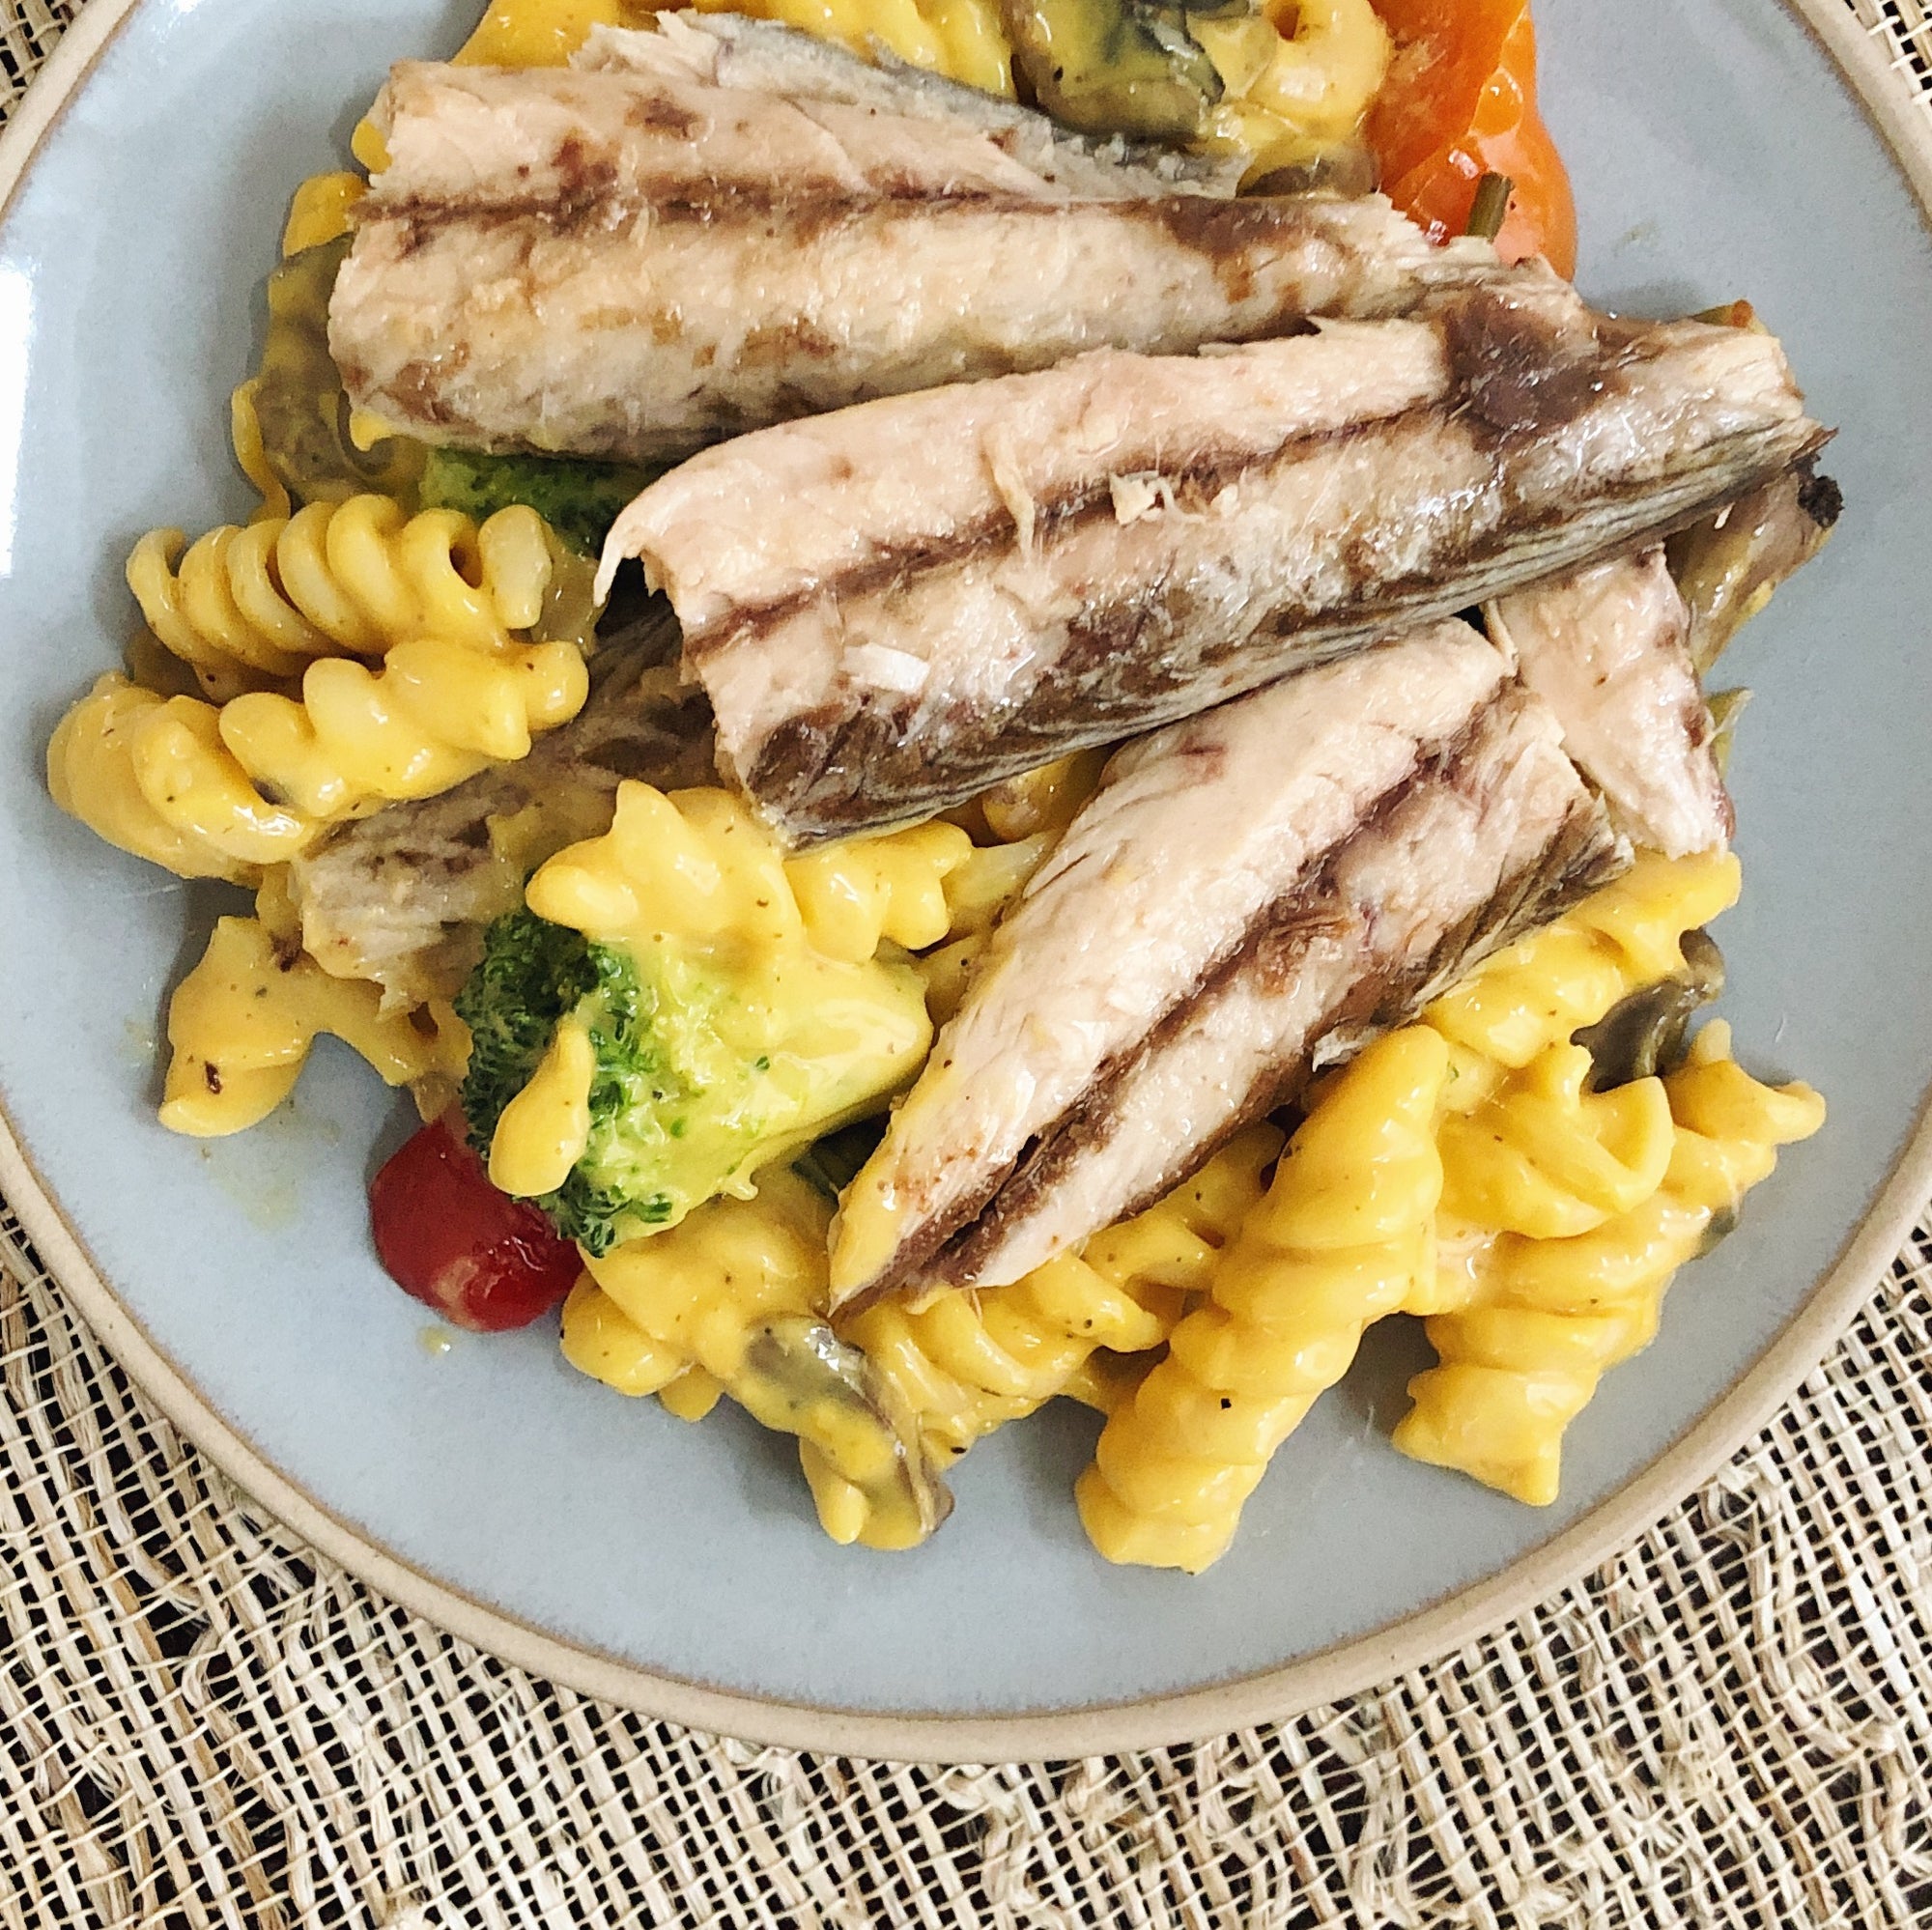 Mac Mac and Cheese - Mackerel Fillets and Macaroni and Cheese - Donostia Foods